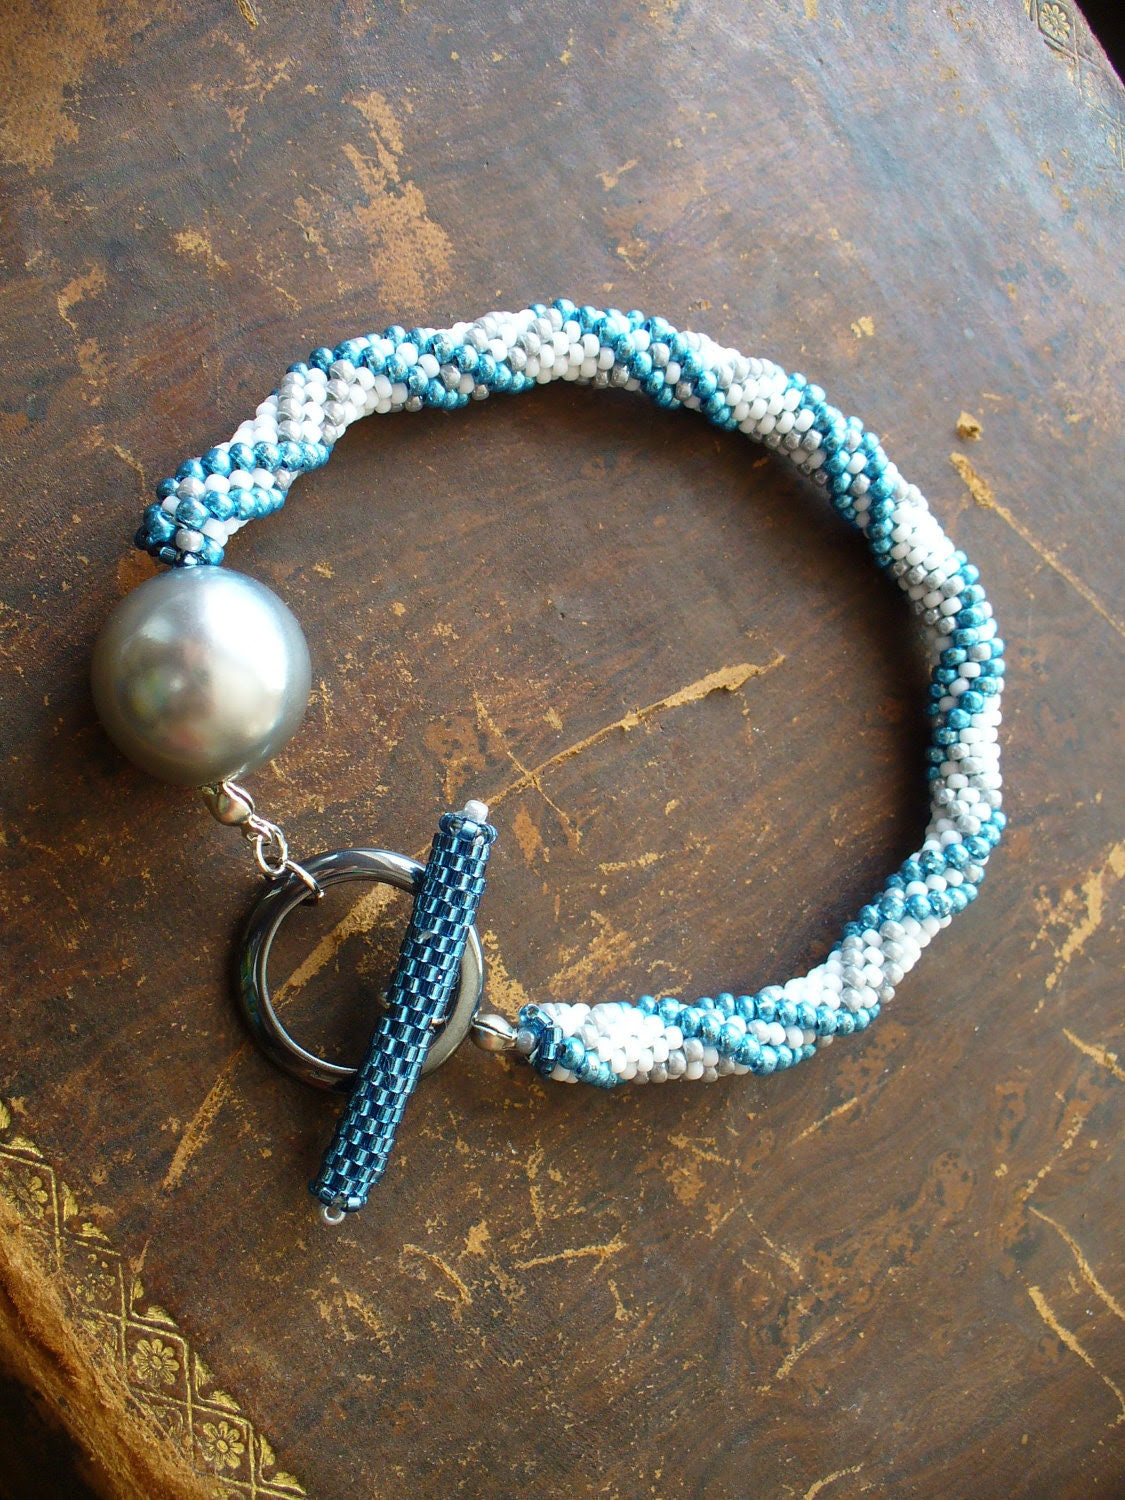 Bead Crochet Rope Bracelet with pearl-grey and metallic-blue stripes on white ground and unique Toggle-clasp - DianaCoe